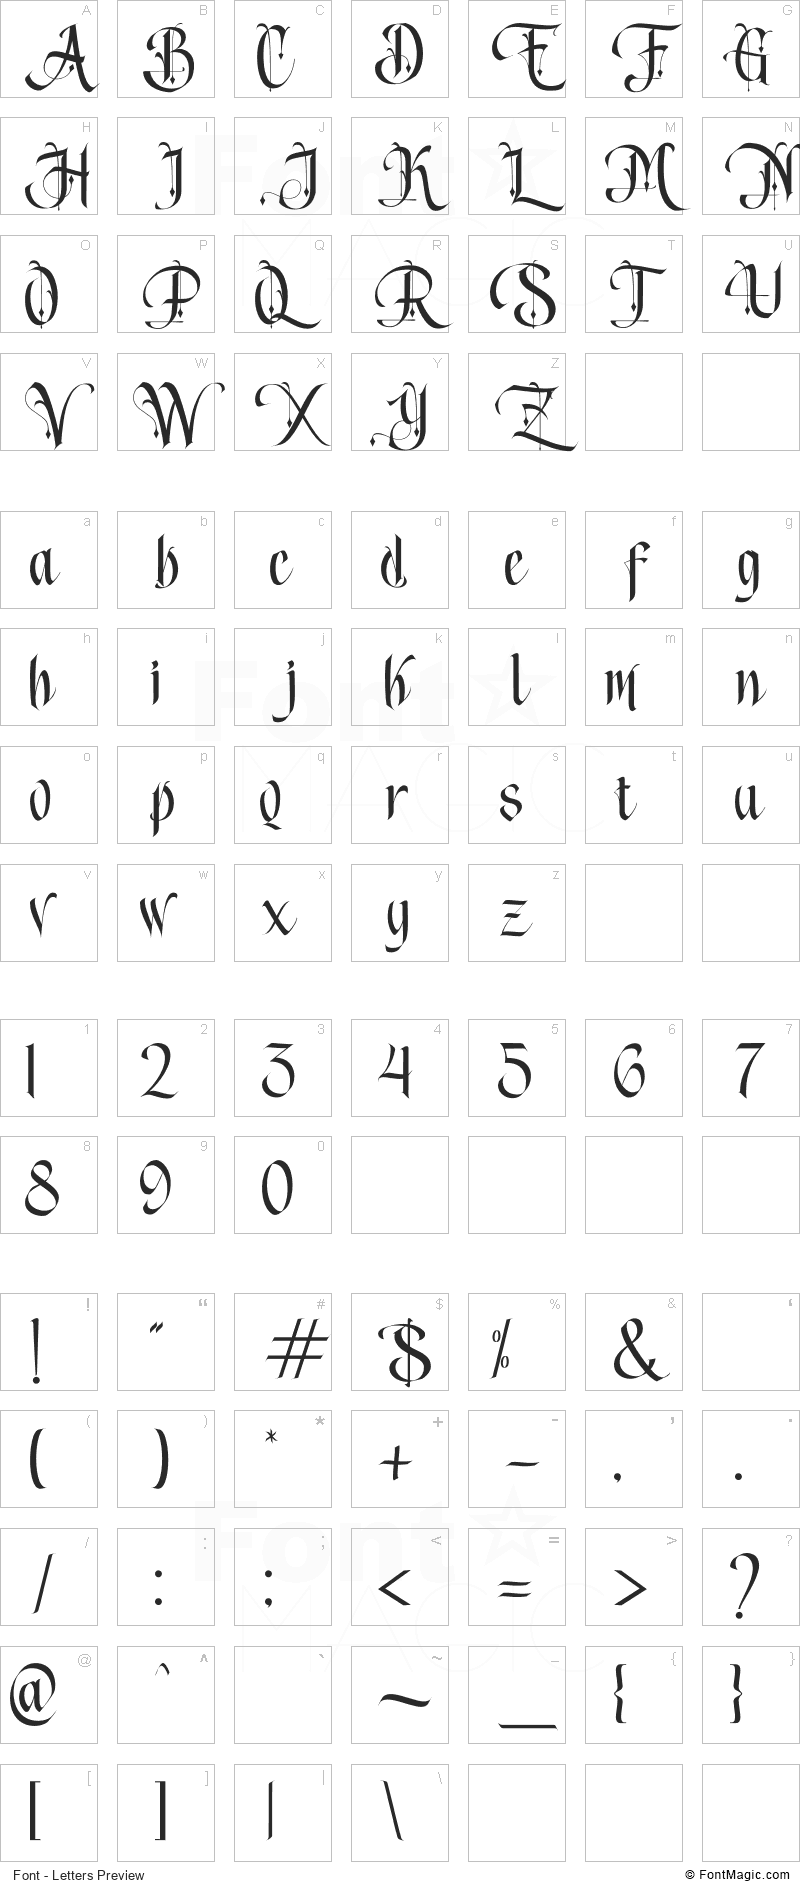 Song of Coronos Font - All Latters Preview Chart